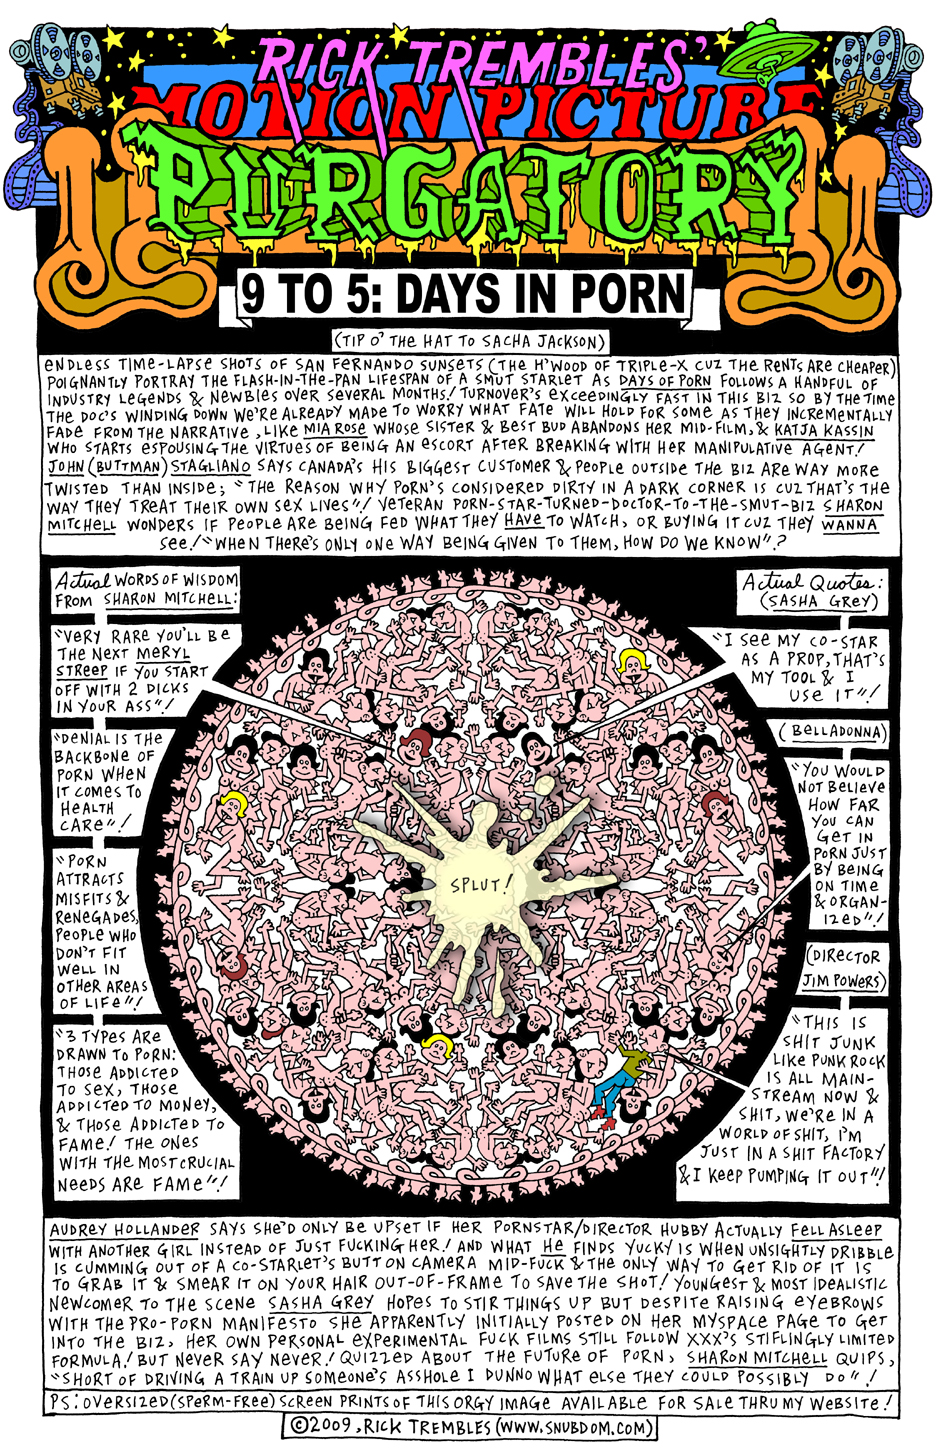 MOTION PICTURE PURGATORY: â€œ9 to 5: Days in Pornâ€ (2009) | SNUBDOM